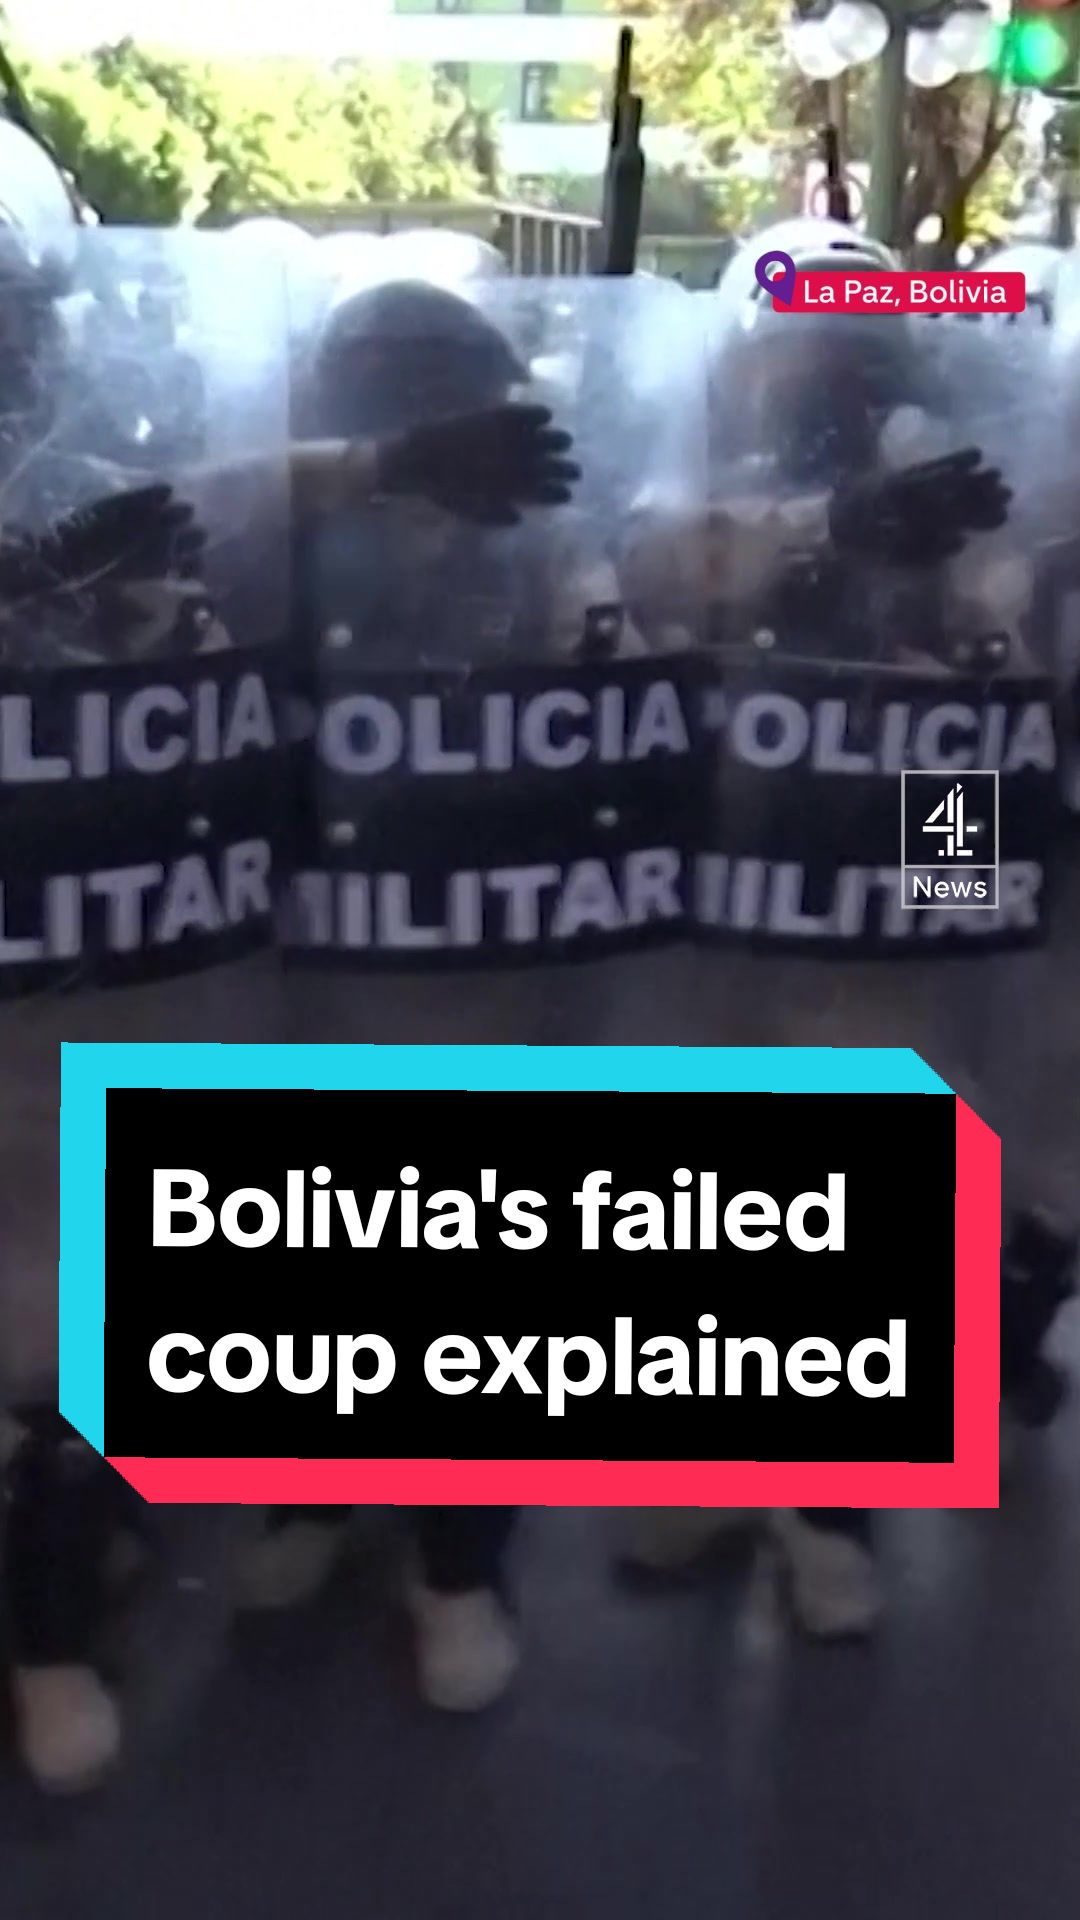 The Bolivian government says it stopped a coup attempt on Wednesday, and has arrested the country's former army and navy commanders for trying to overthrow their democratically elected leaders. But the army chief claims he was told by President Luis Arce to stage the whole thing to help boost his popularity.  Here's what we know. #Bolivia #Coup #SouthAmerica #Military #LuisArce #Channel4News